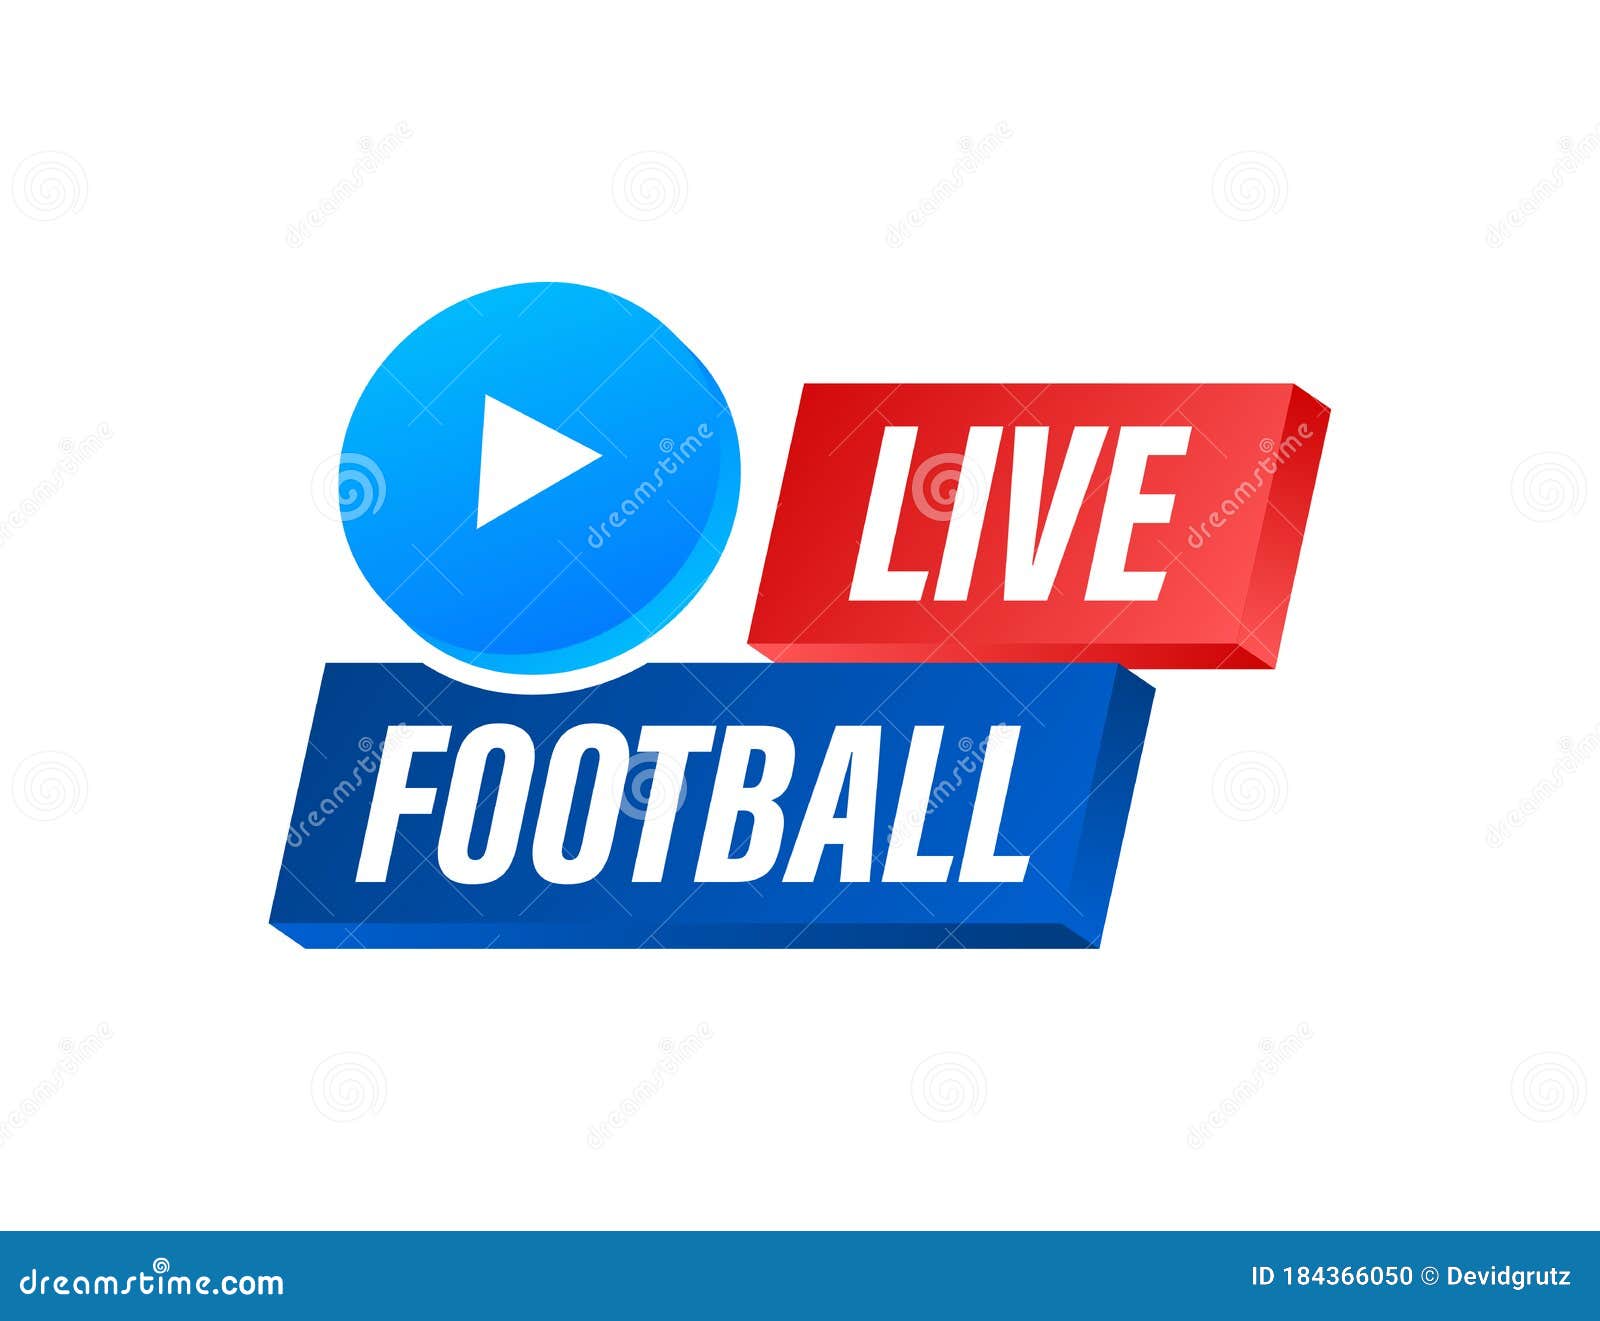 Live Football Streaming Icon, Button for Broadcasting or Online Football Stream